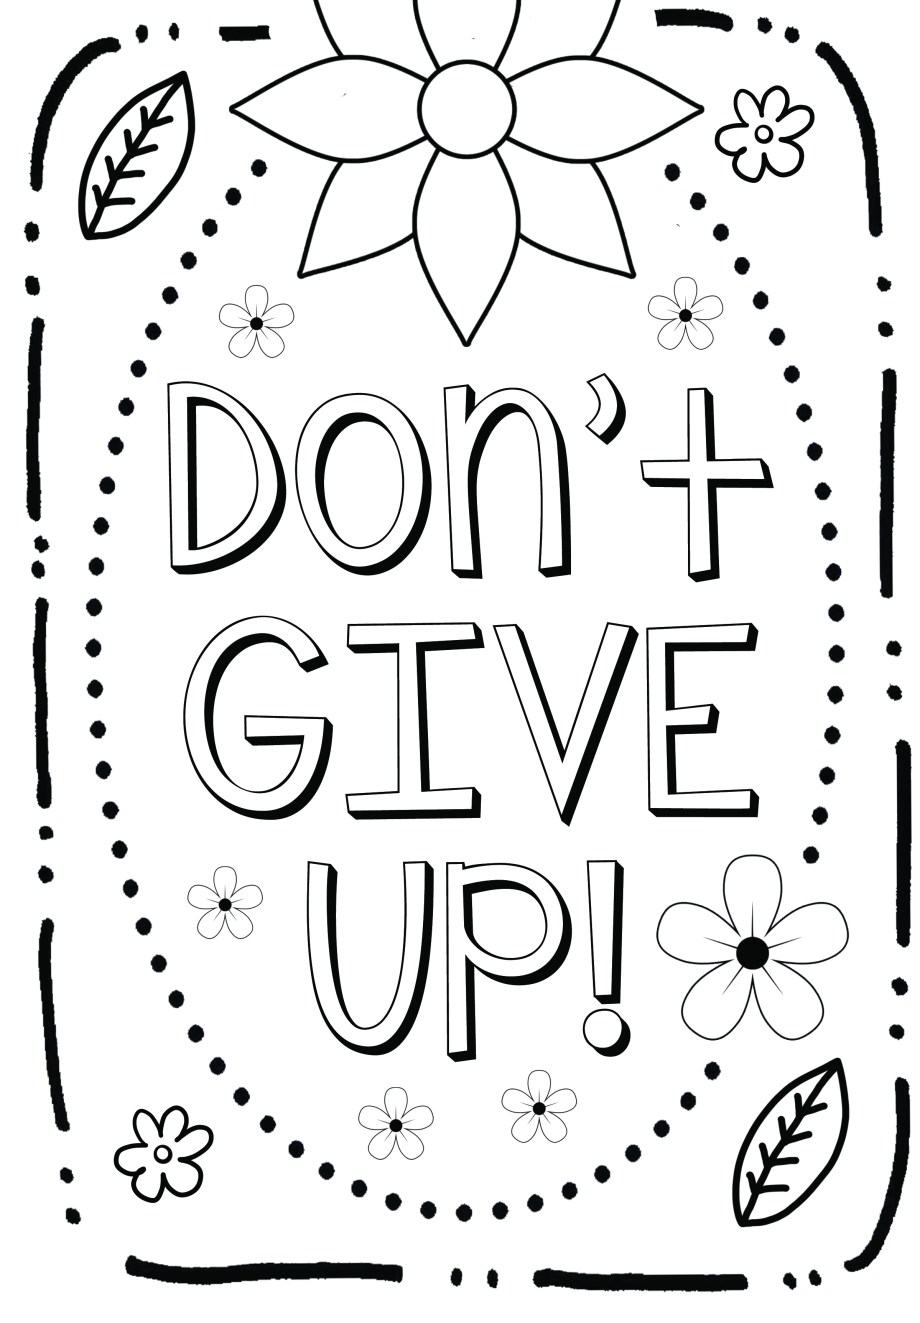 Free coloring page growth mindset â art is basic an elementary art blog